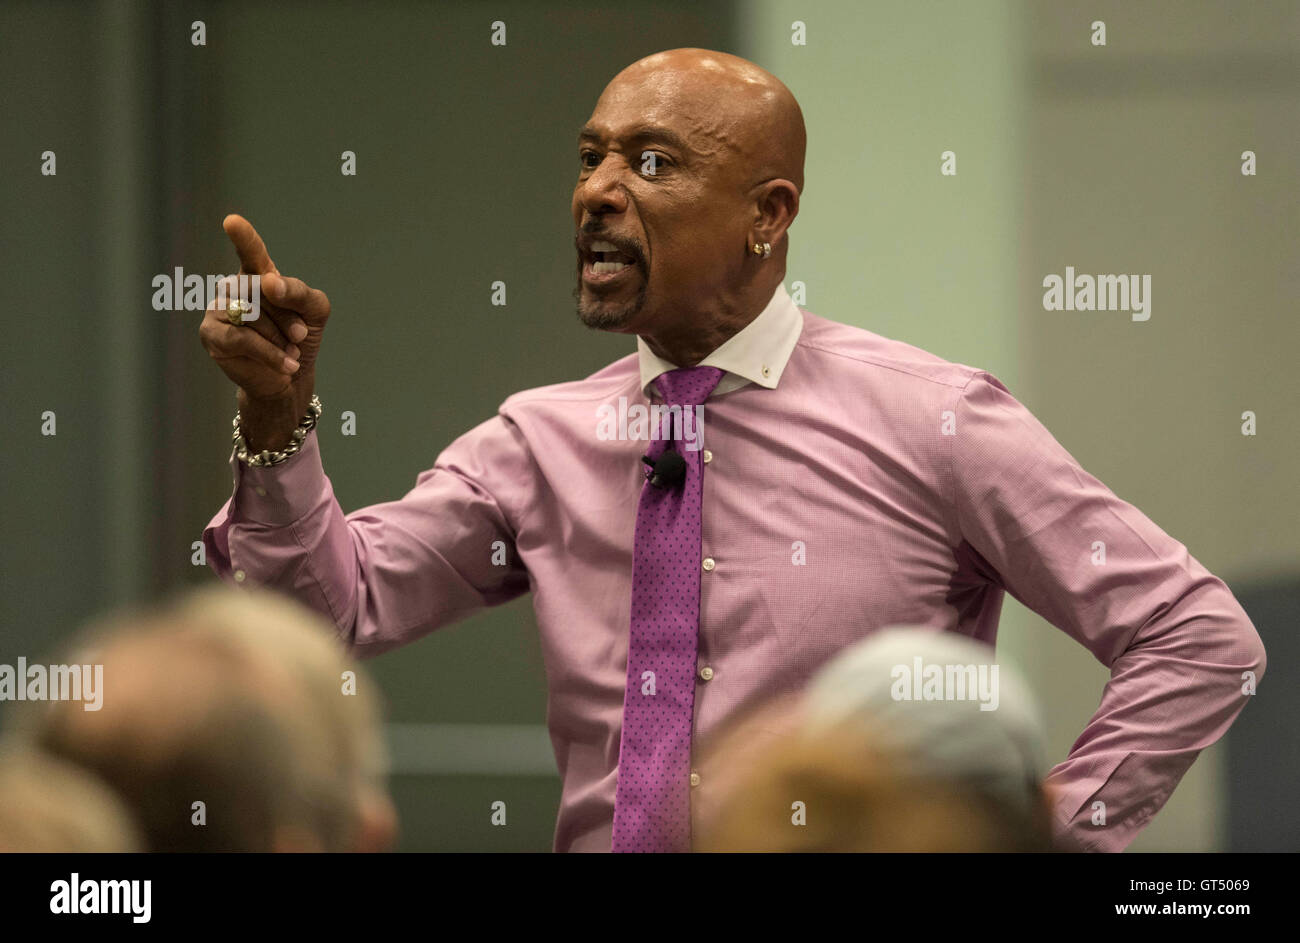 Los Angeles, California, USA. 08th Sep, 2016. MONTEL WILLIAMS eschews the stage to deliver his keynote address amid the audience of expo attendees during the Los Angeles Cannabis World Congress and Business Exposition. The 2016 four-day expo features the latest technologies, solutions and resources for the marijuana industry, which, according to the event website, may top 35 billion dollars by 2020. On November 8 of this year, California voters will decide the fate of Proposition 64, the Adult Use of Marijuana Act, which would legalize the recreational use of cannabis in the state.(Credit Stock Photo